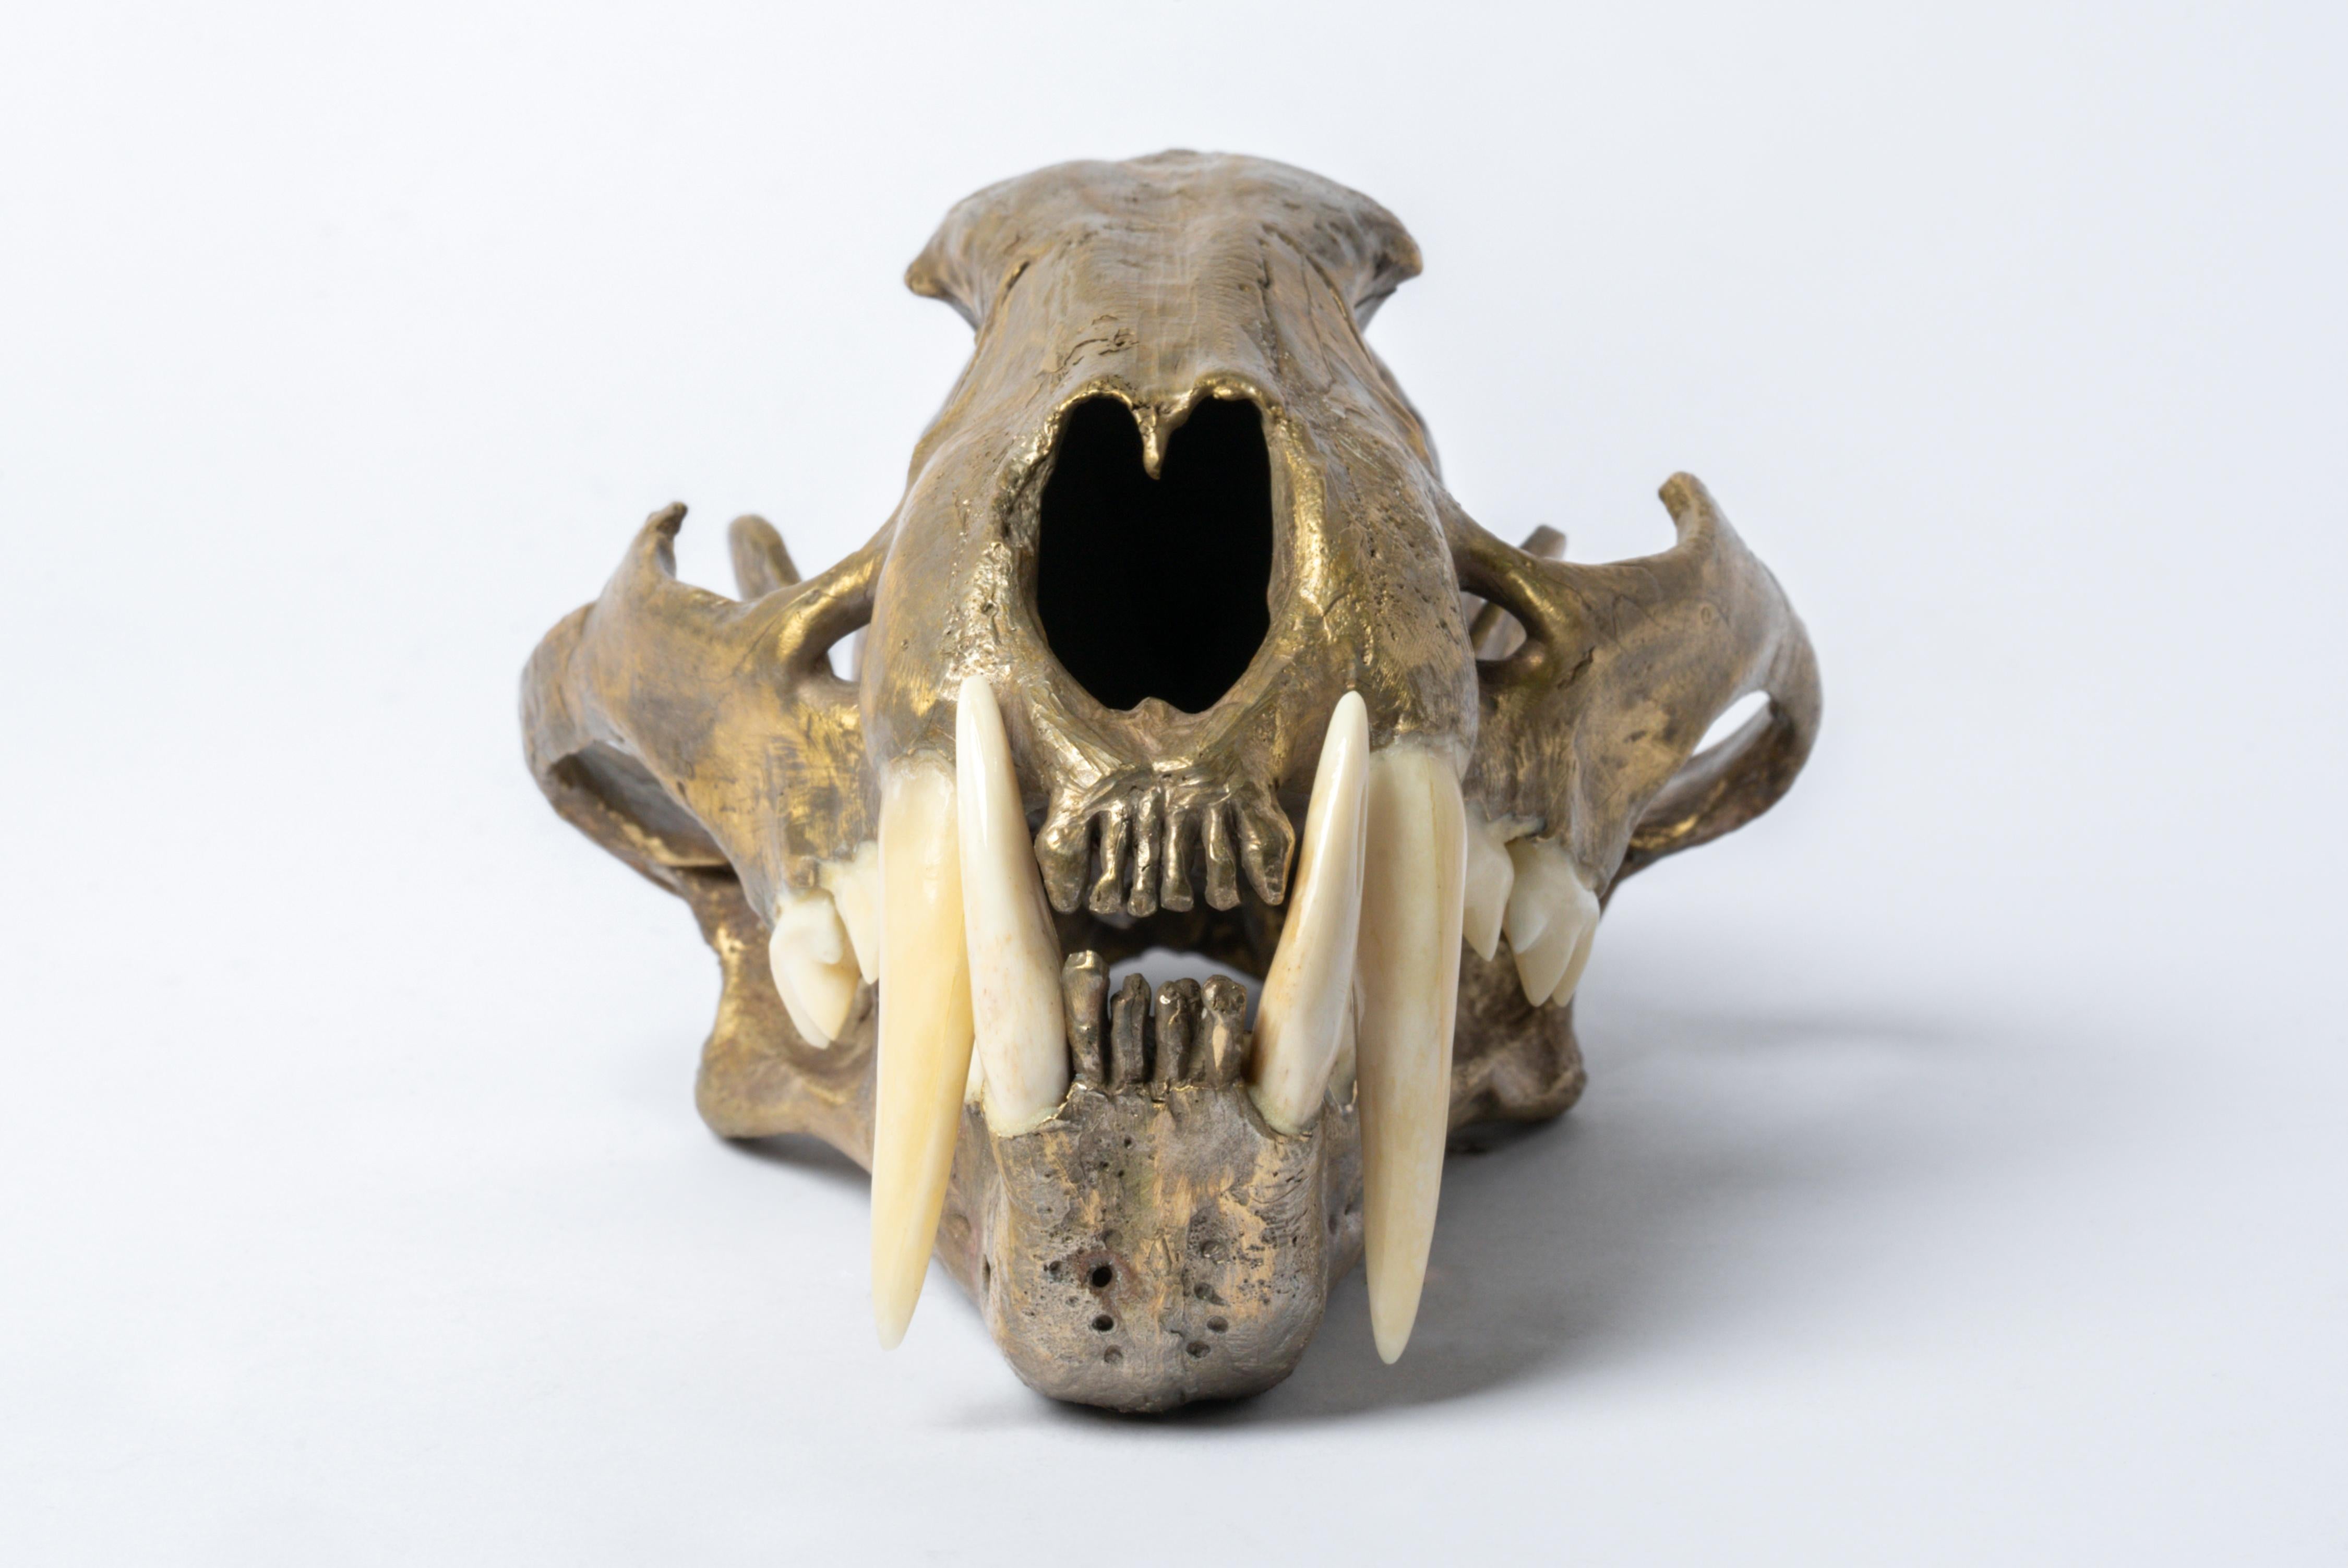 Leopard Skull in matte brass. It is a striking and intriguing piece of art, capturing the essence of the majestic leopard in a unique and captivating form. Its construction adds a touch of elegance to the fierce and powerful symbolism of the